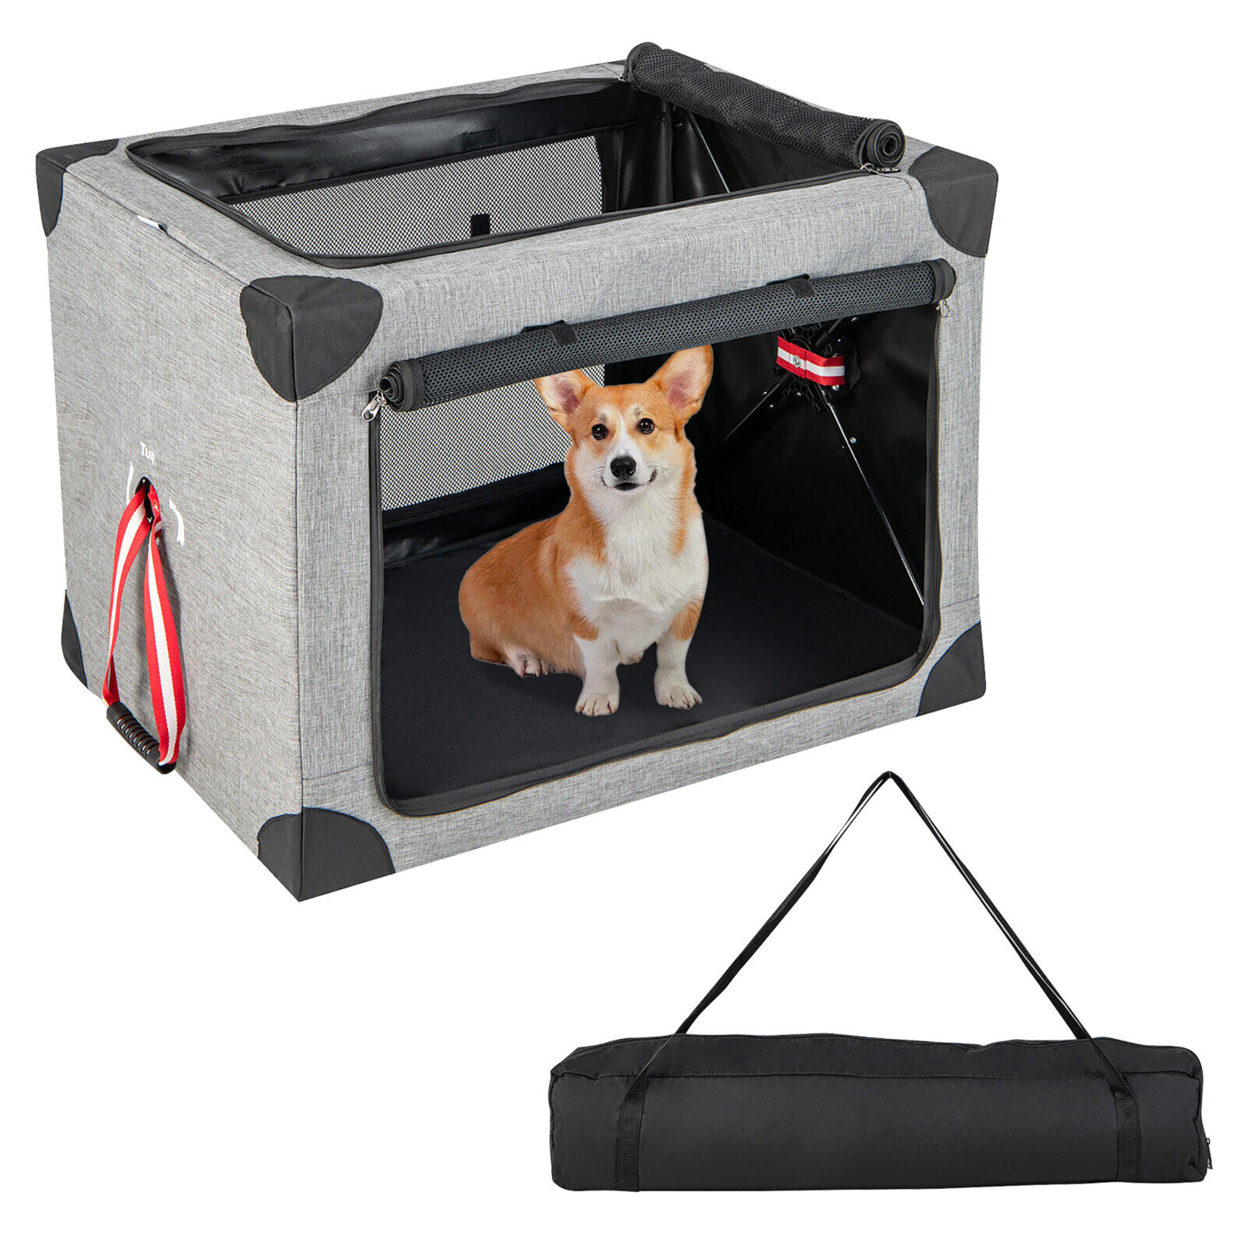 26/32/37 In Portable Folding Dog Crate W/ Mesh Mat & Locking Zippers For Cat Carrier Use - M